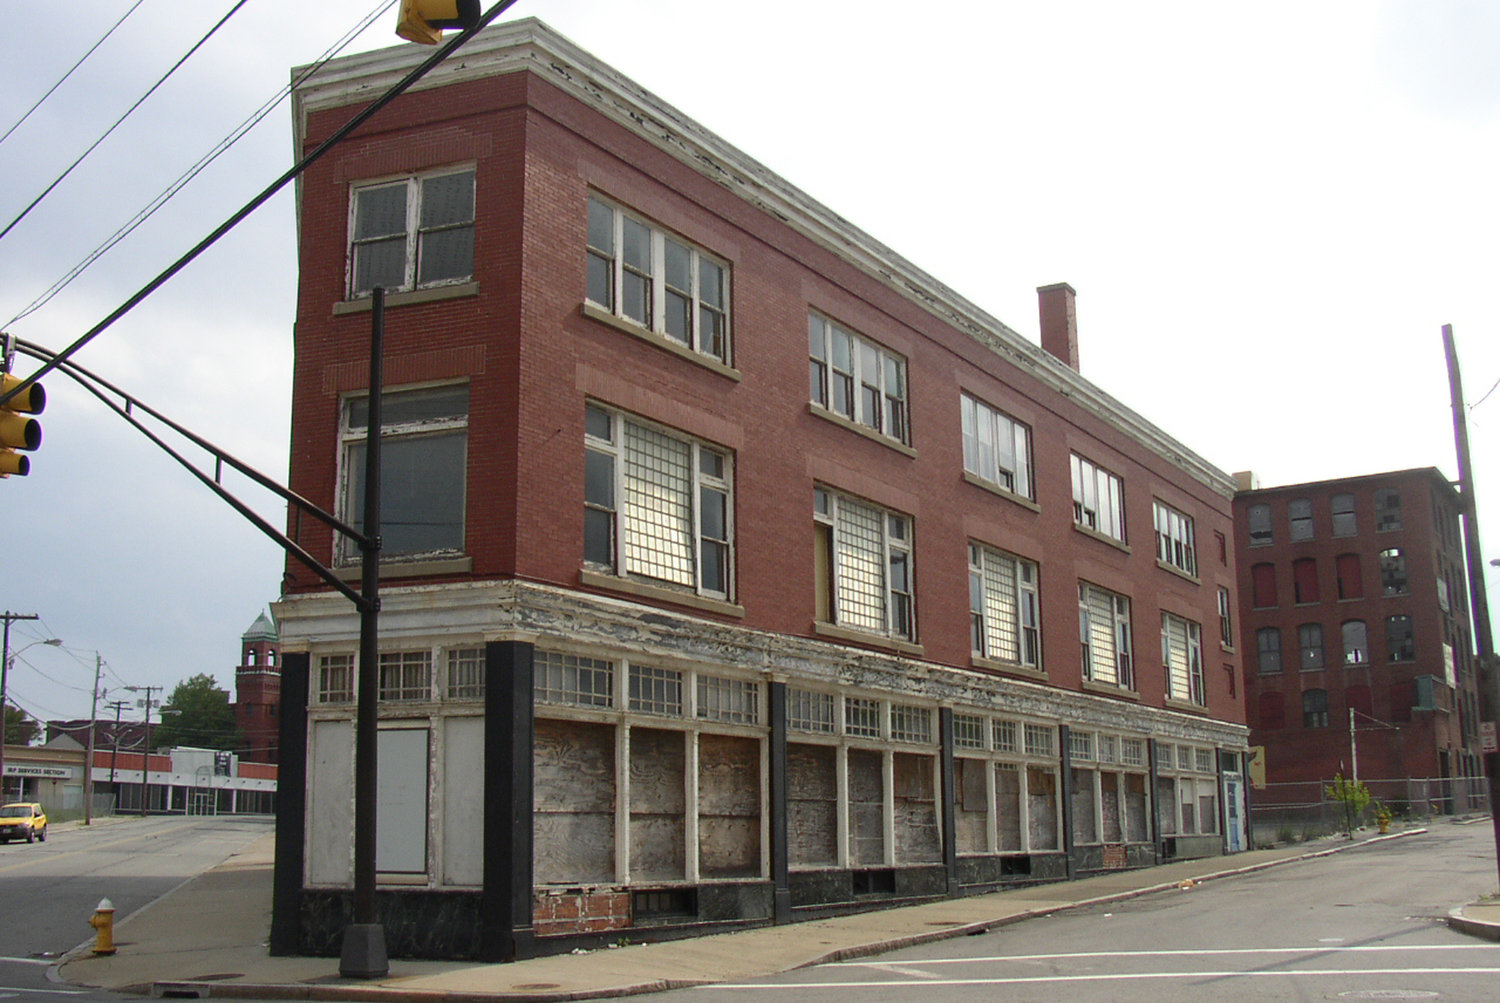 Gately Building: “The Gately building in Pawtucket stood in decay for 20 years before redevelopment in 2014.”